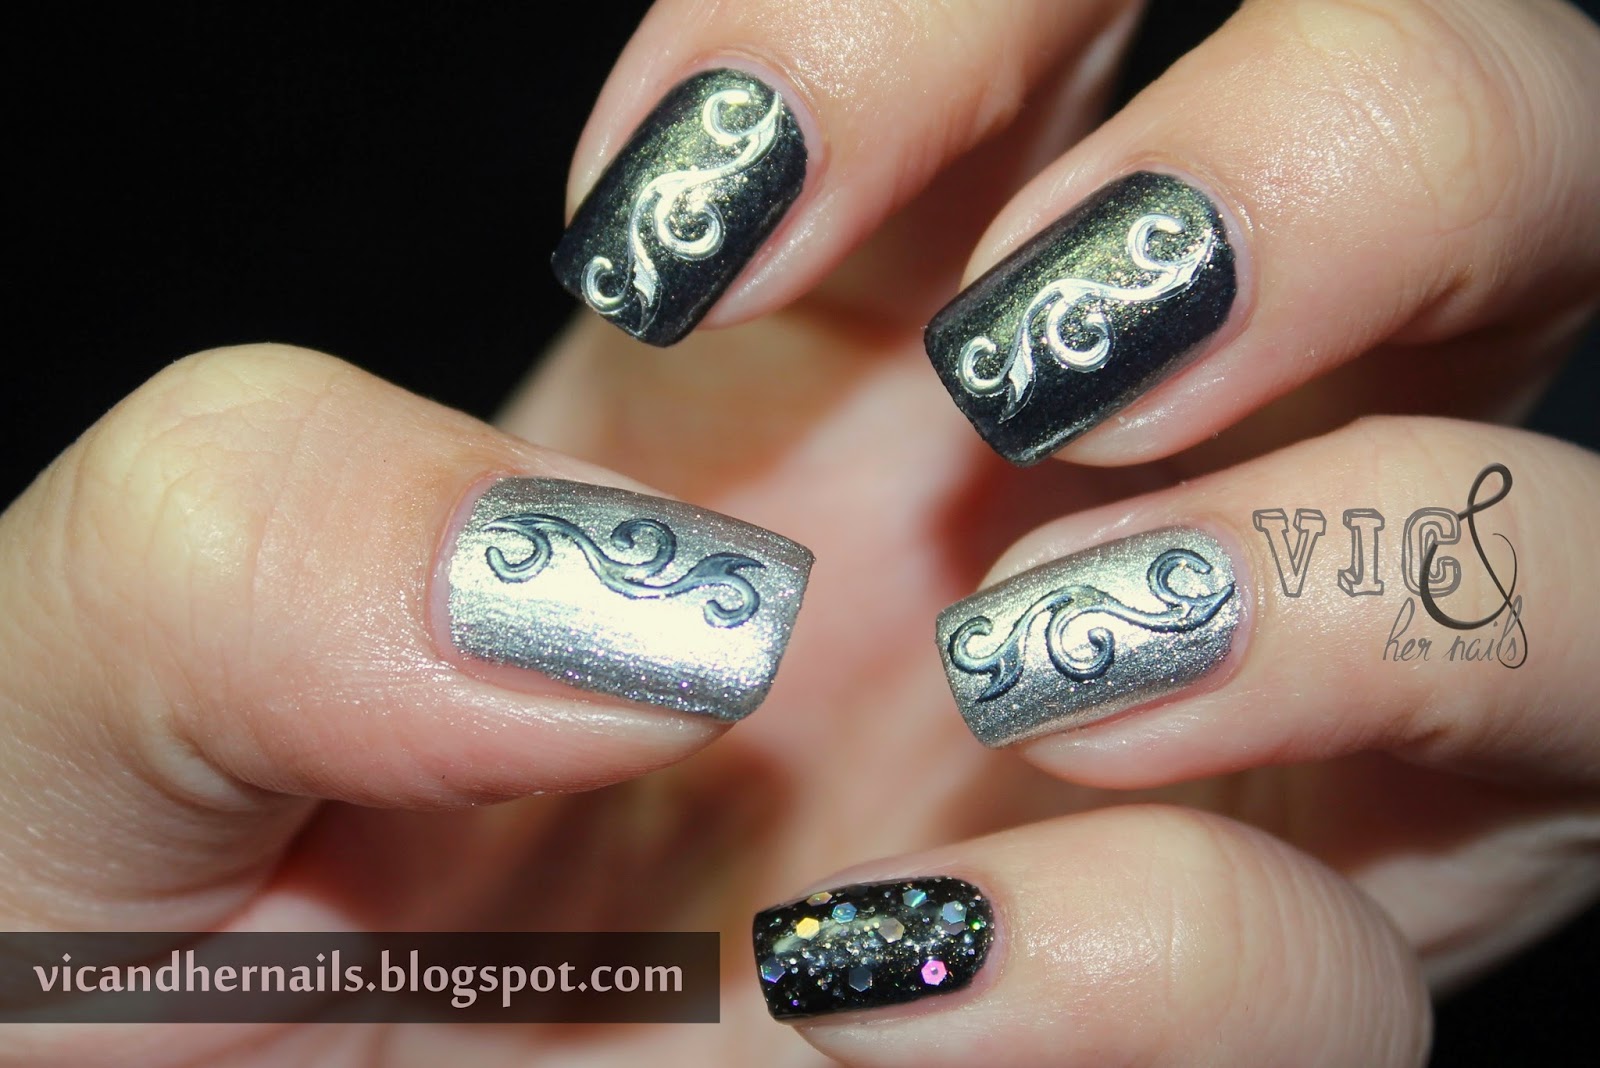 8. How to Use Nail Art Stickers for Quick and Easy Designs - wide 8